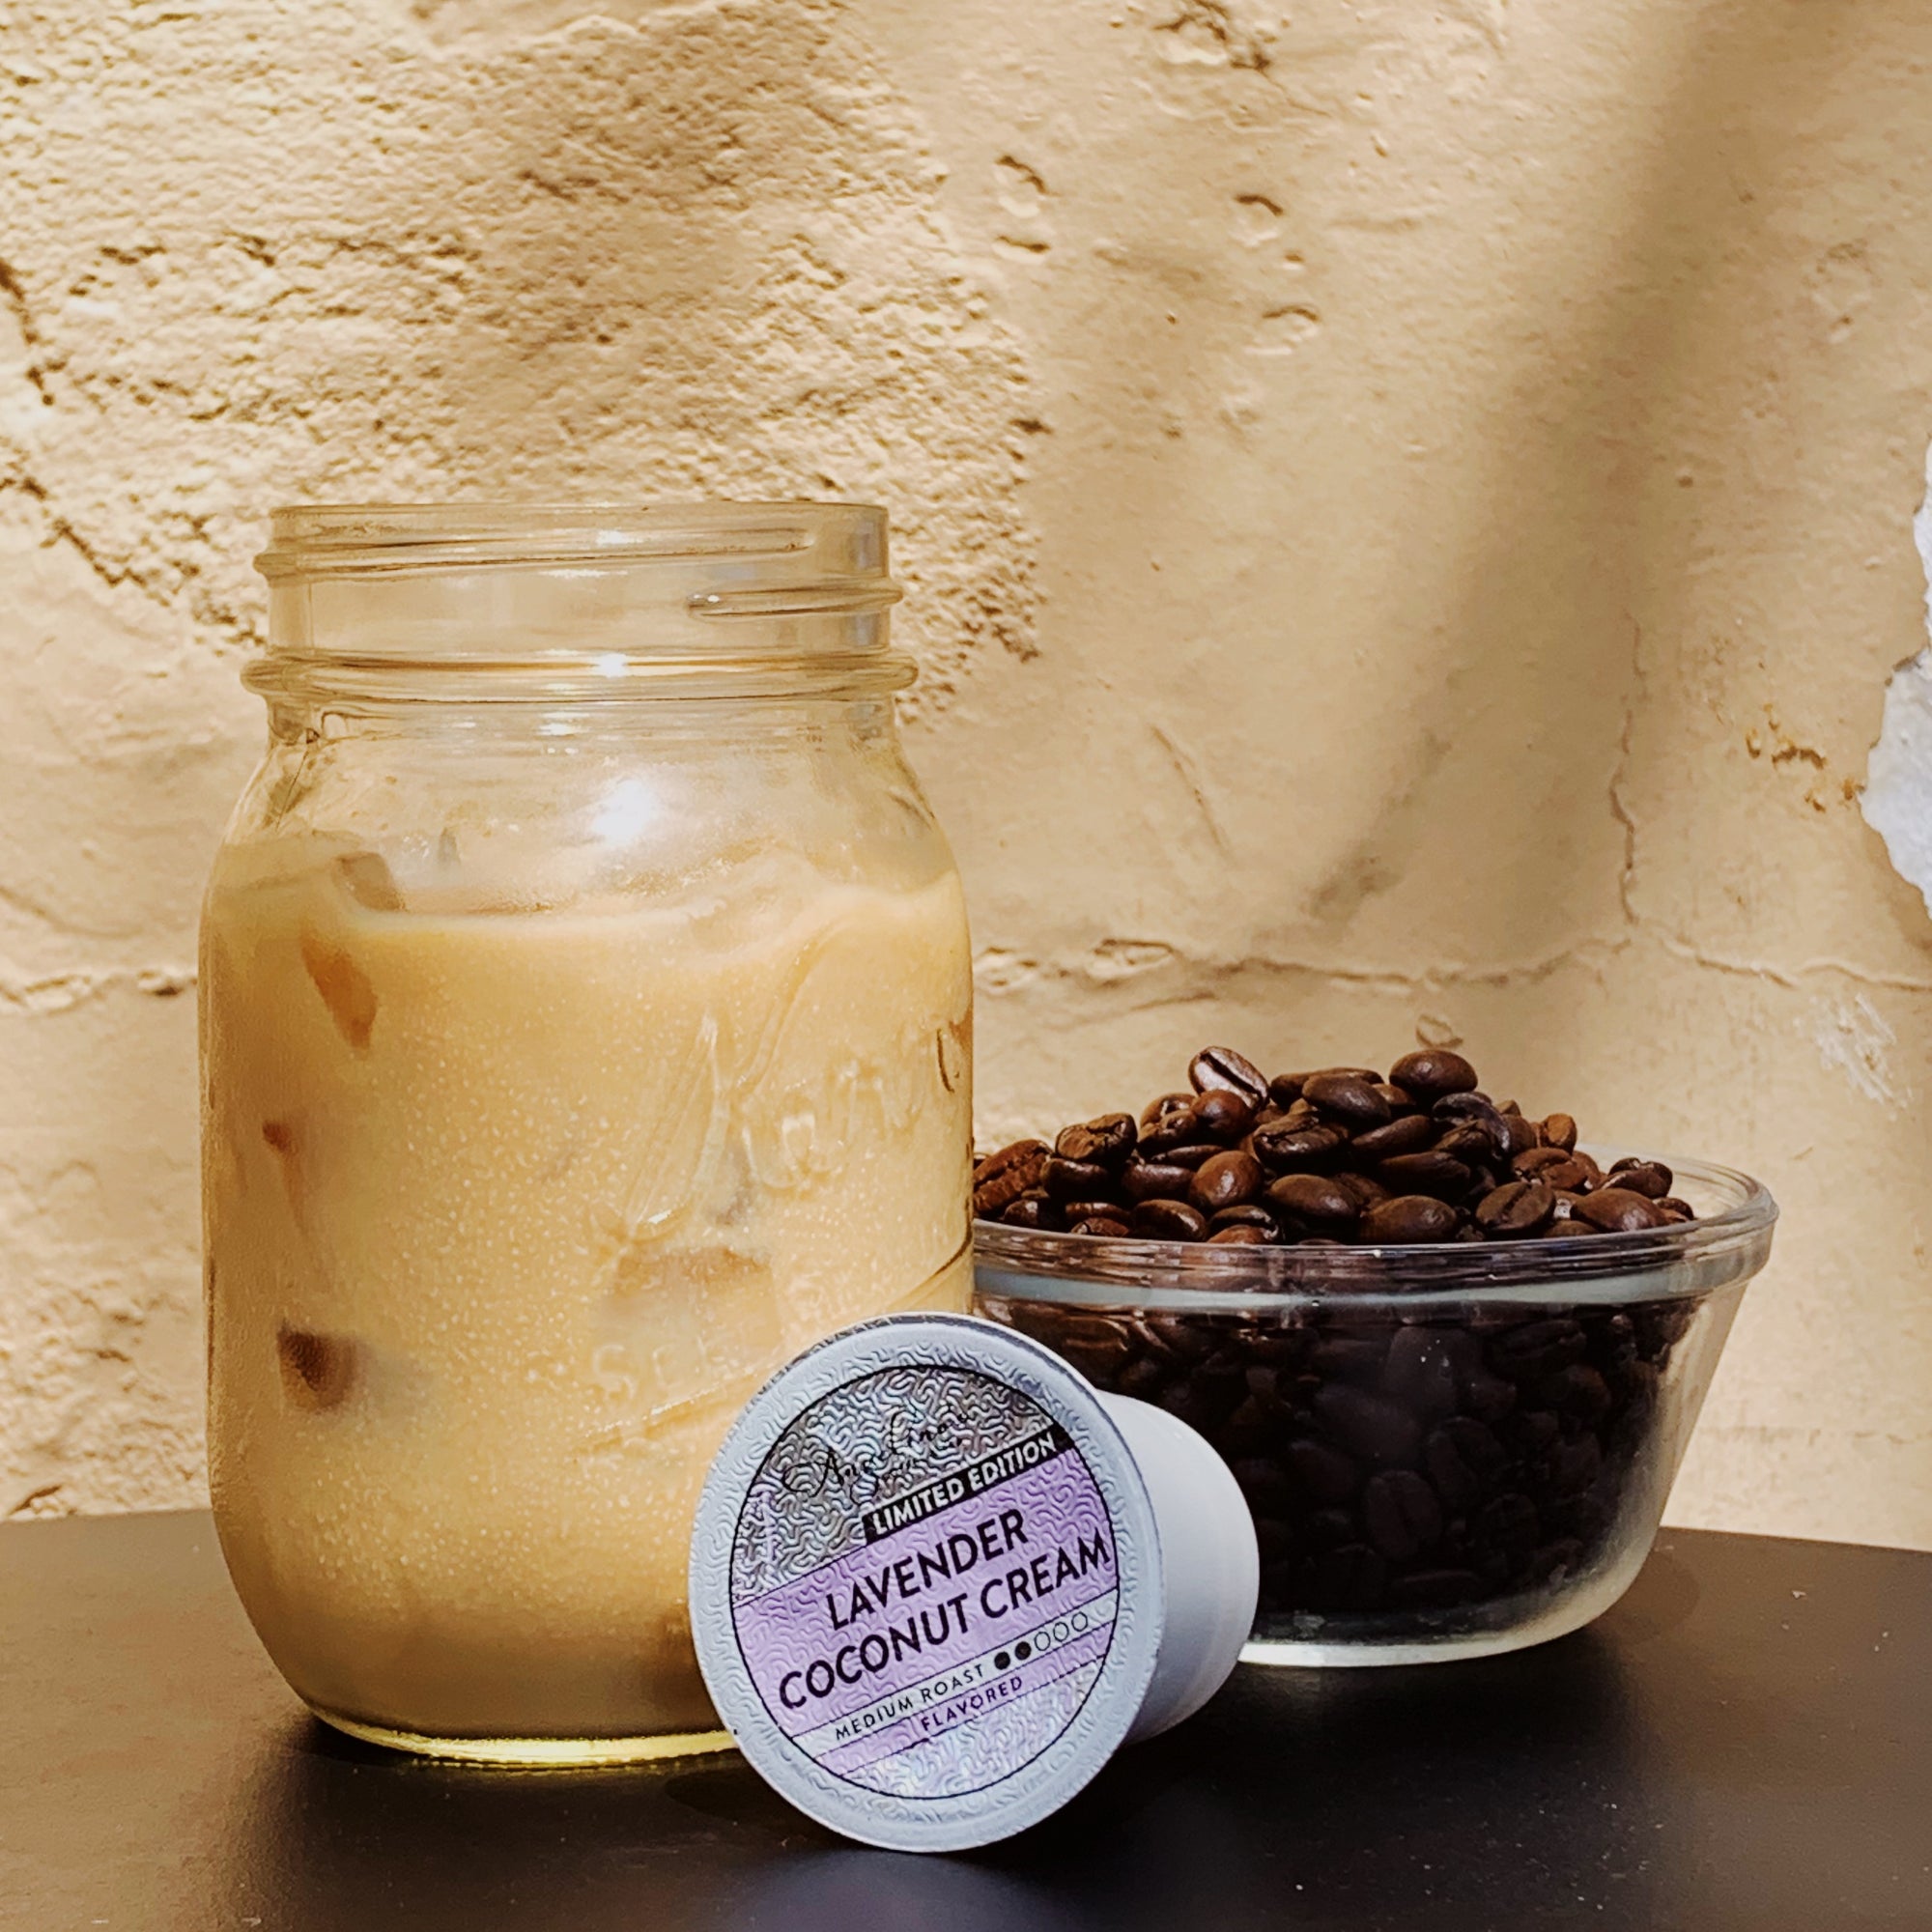 Iced Lavender Coconut Coffee